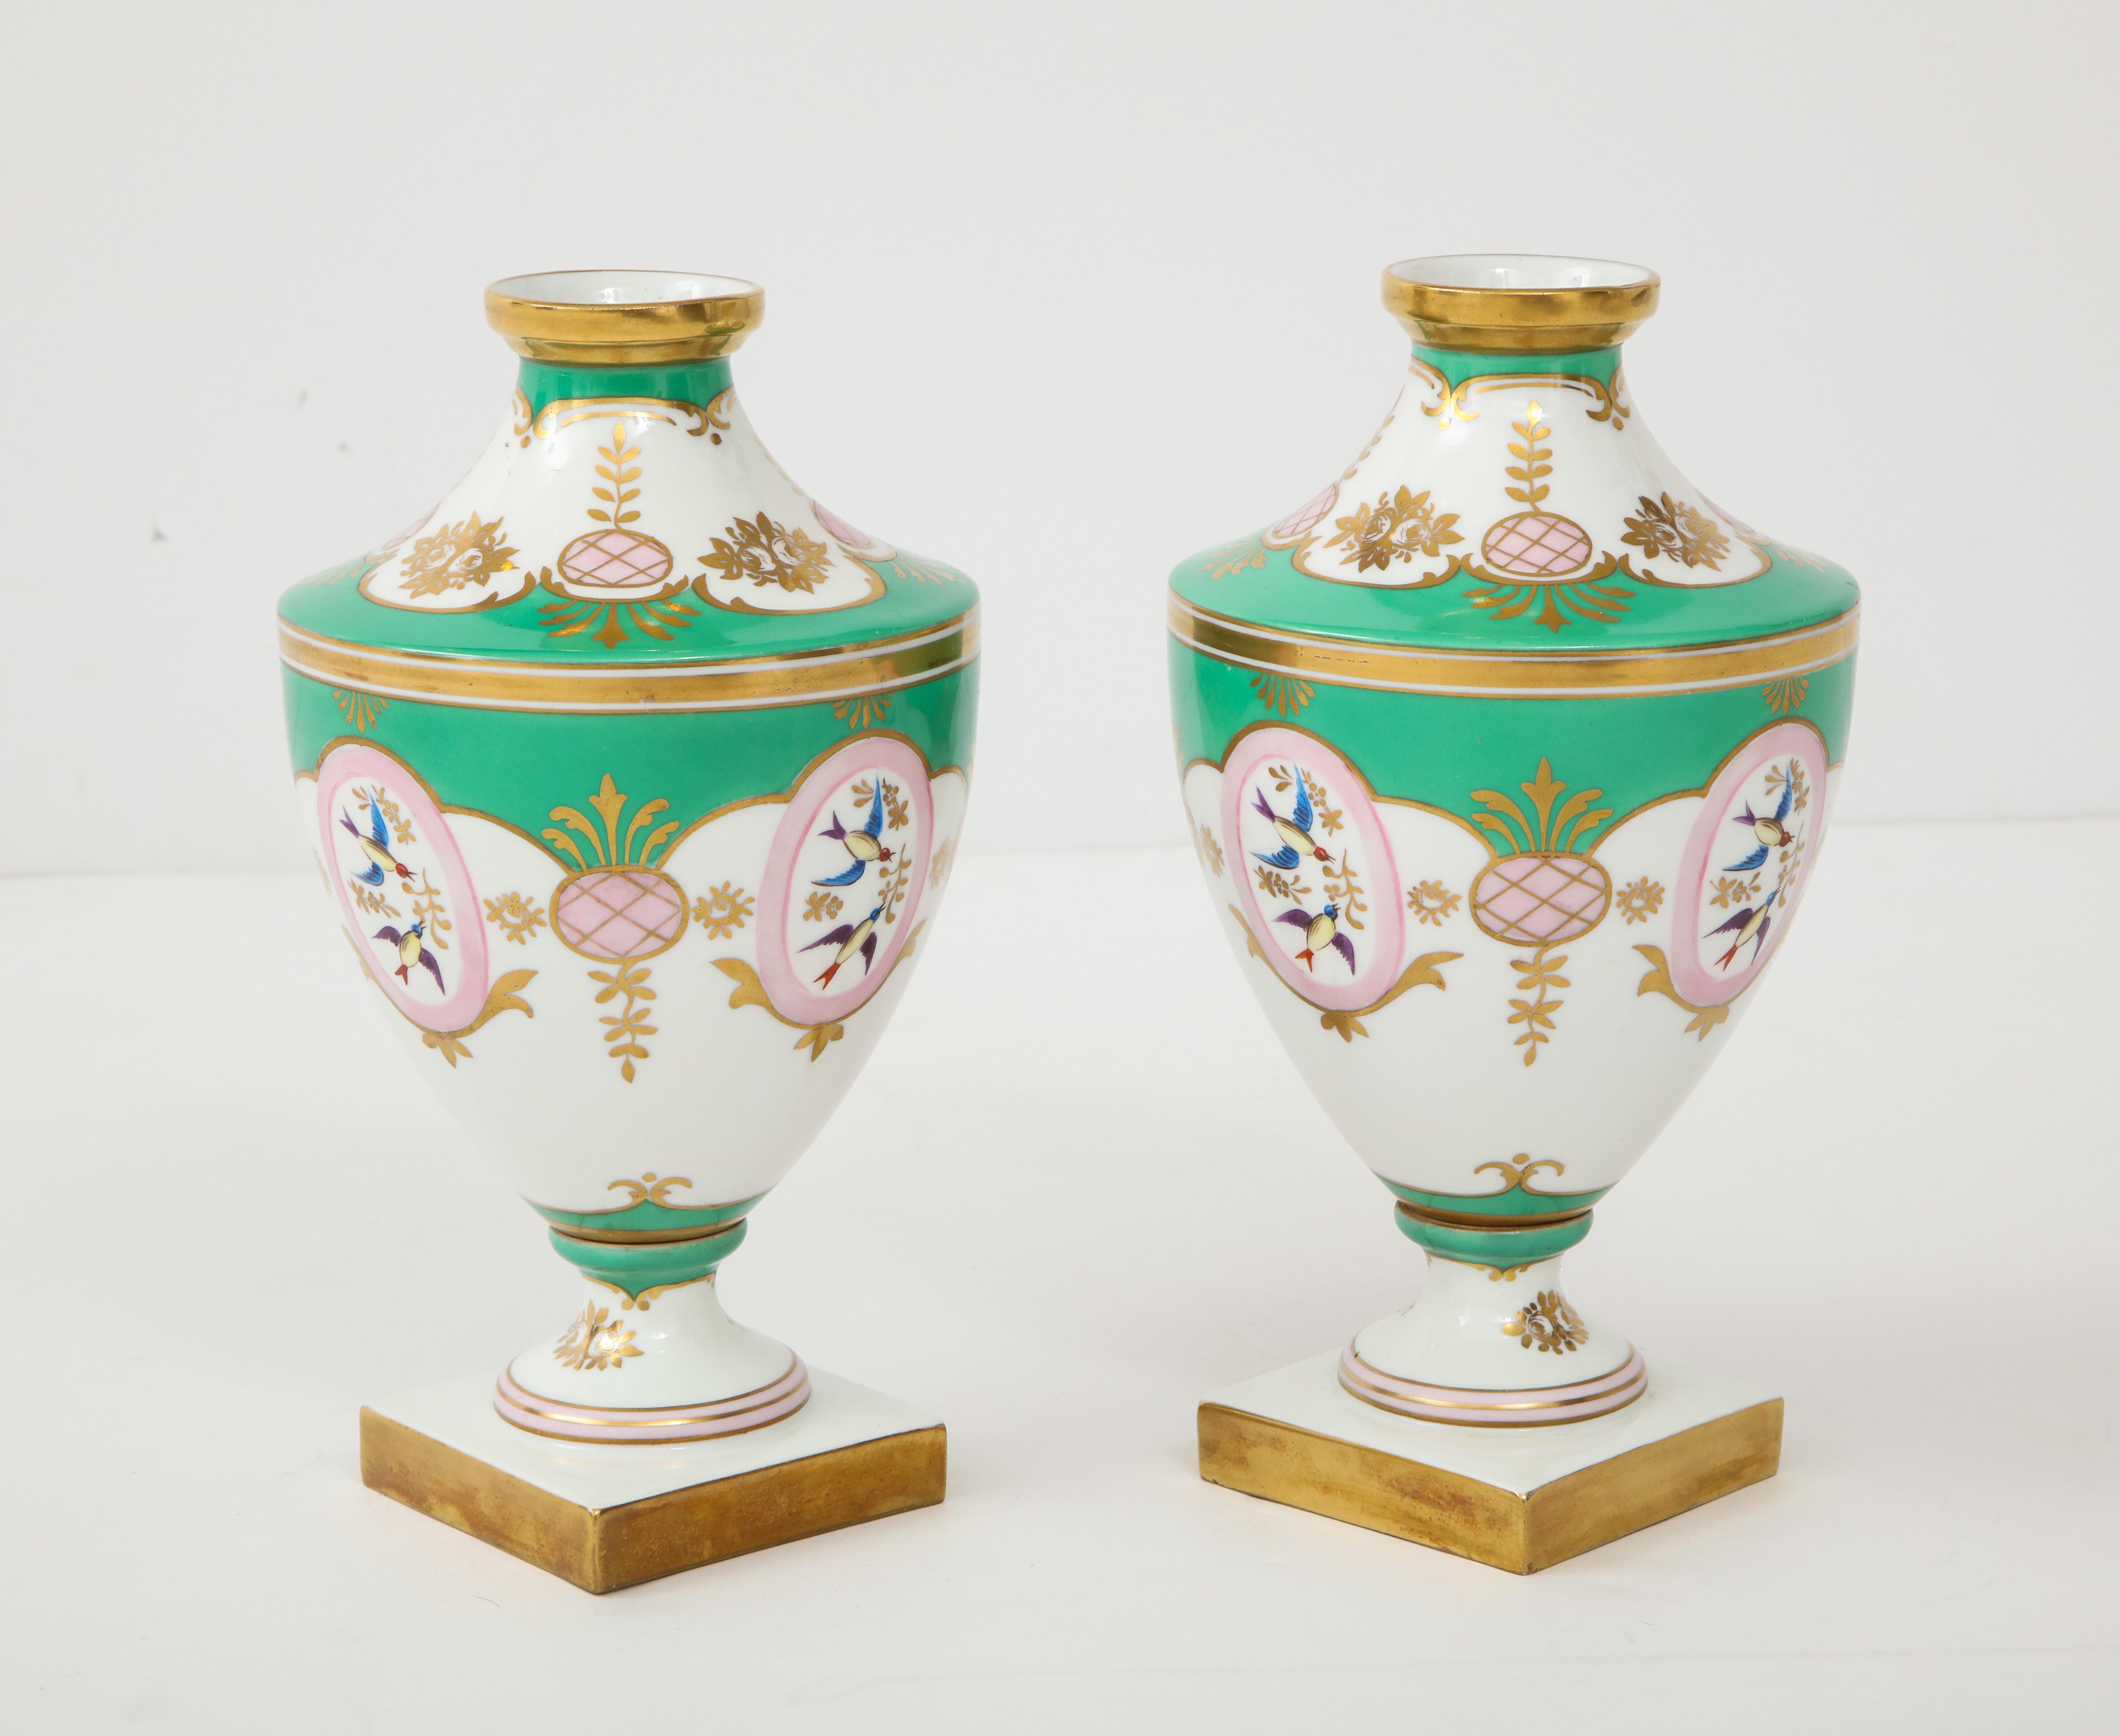 Hand-Painted Pair of 19th Century Porcelain Urn Vases